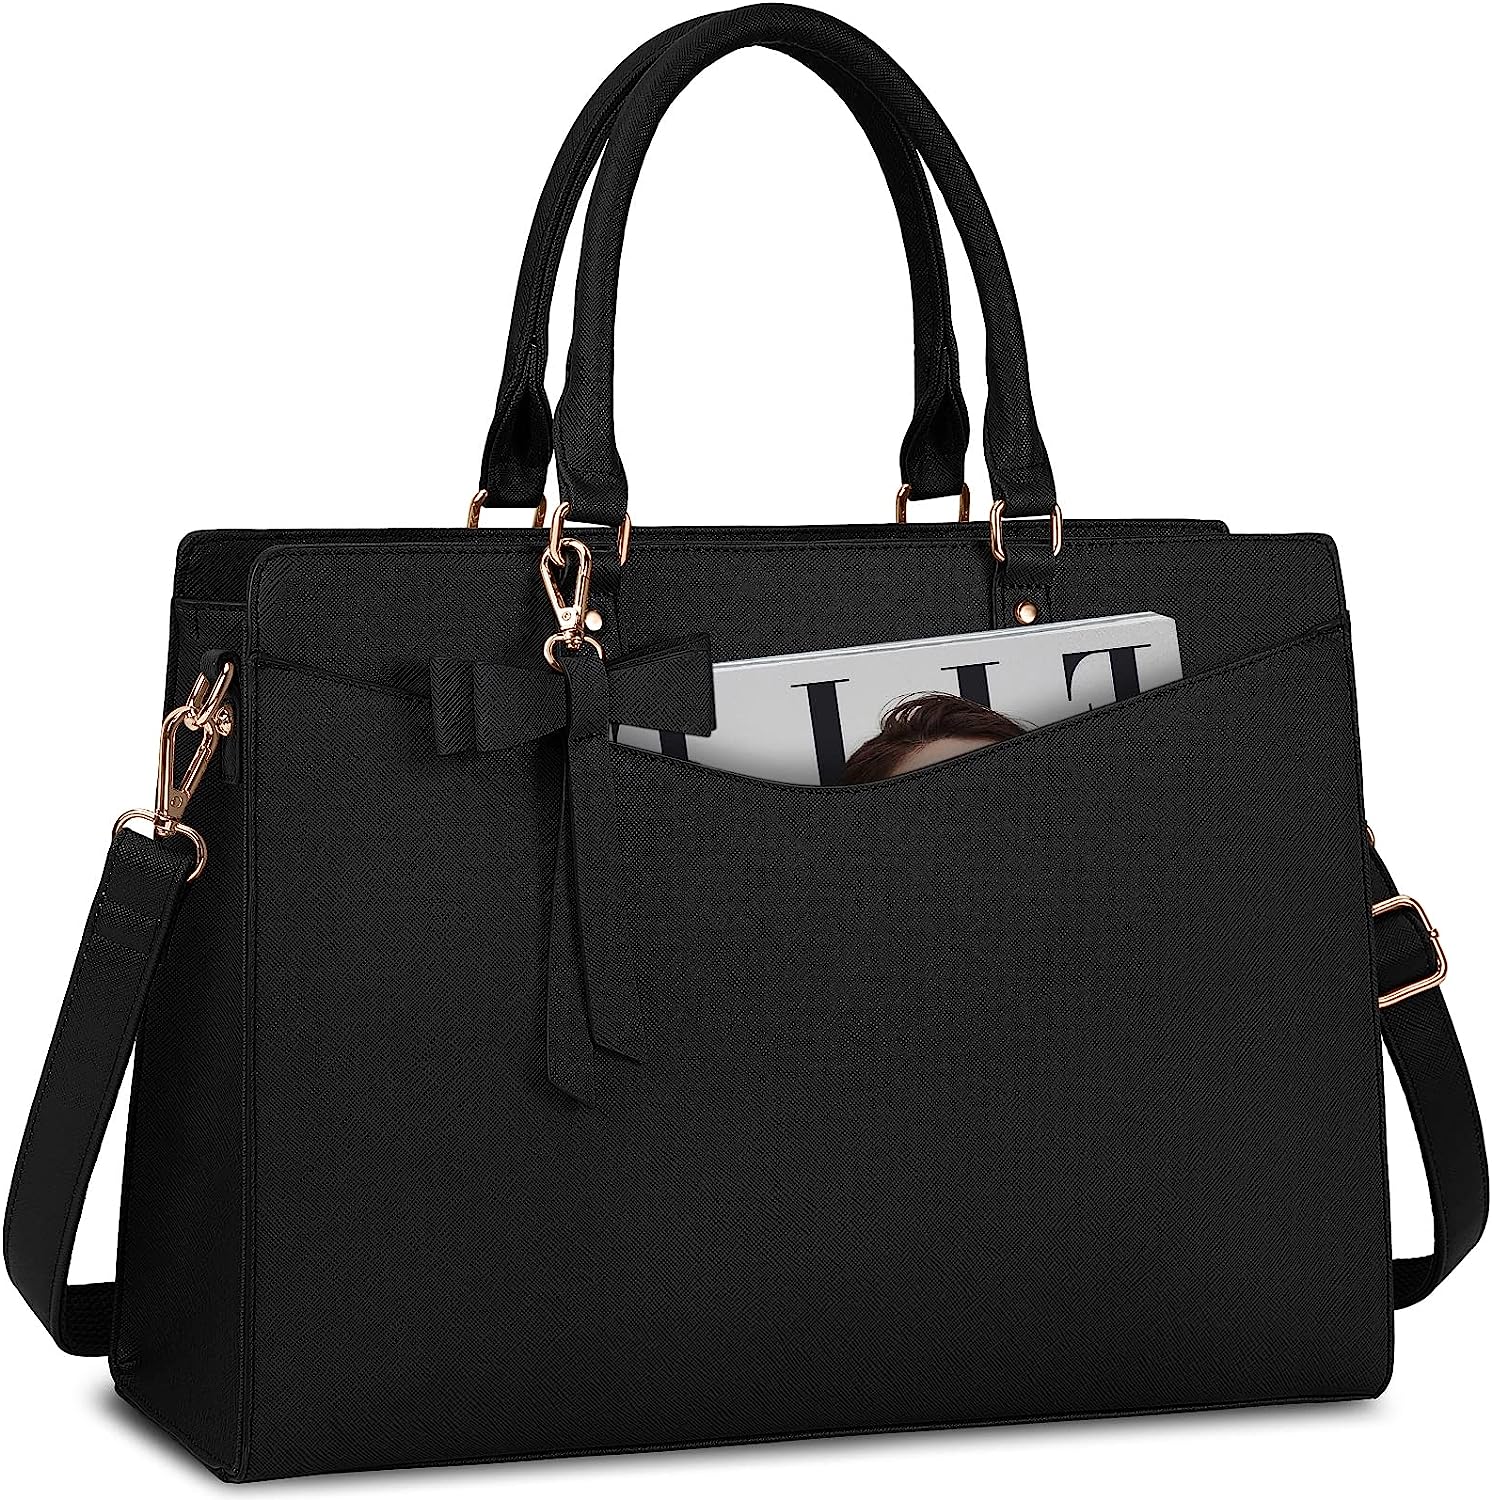 Laptop Bag for Women 15.6 Inch PU Leather Tote Bag [...]